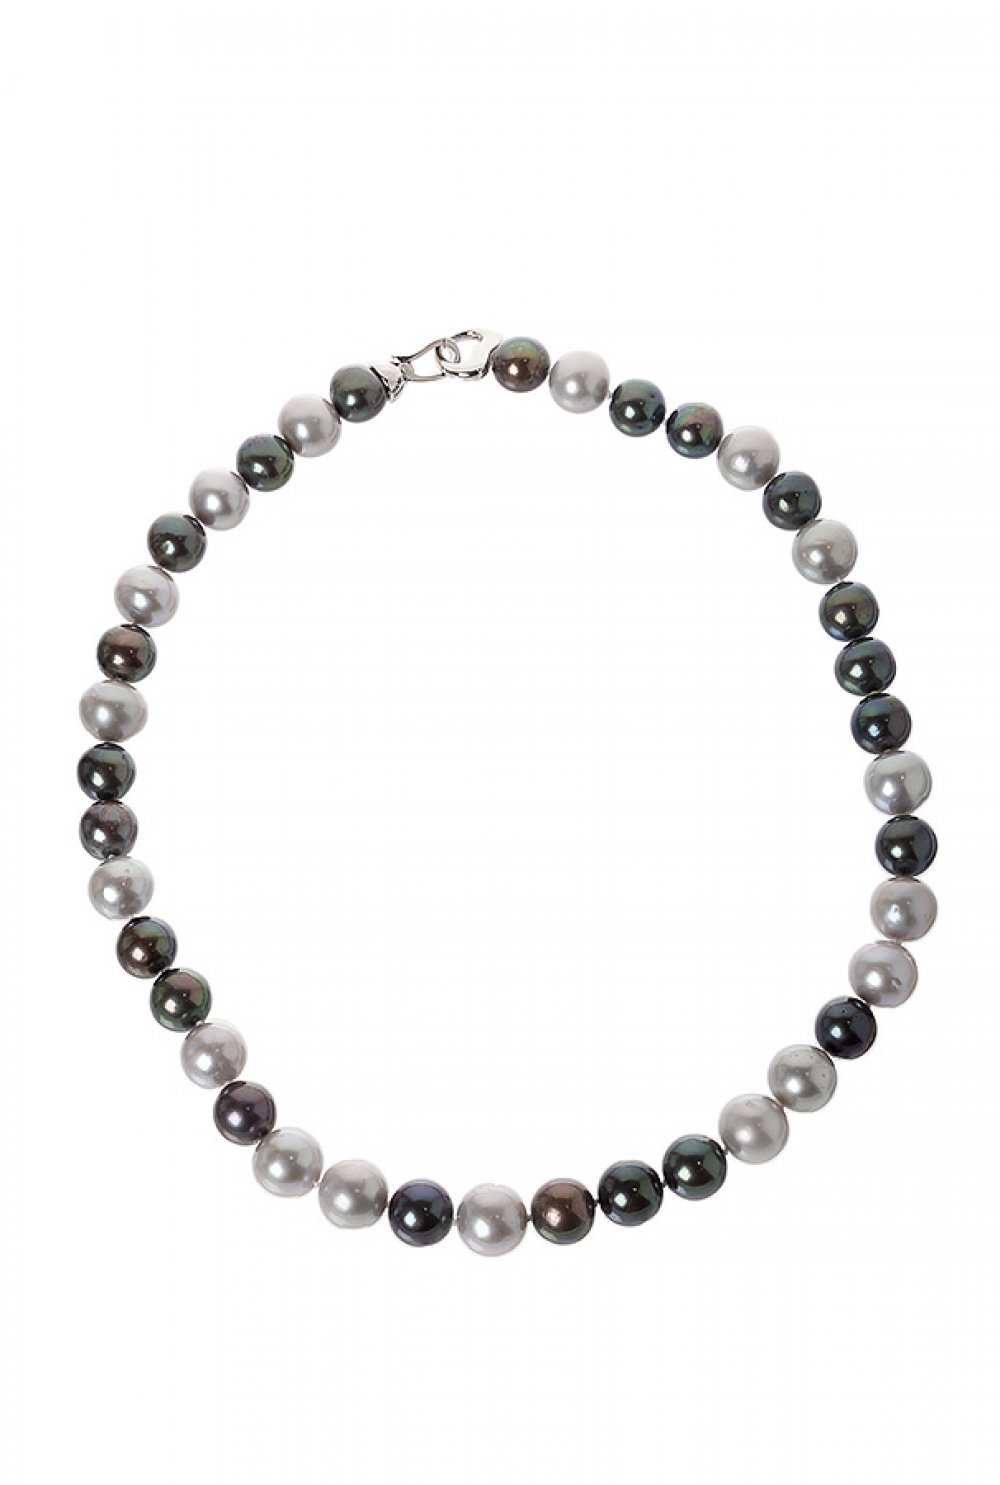 Australian round and tahiti pearl necklace in different shades. Colours from pearly white to - Image 2 of 3